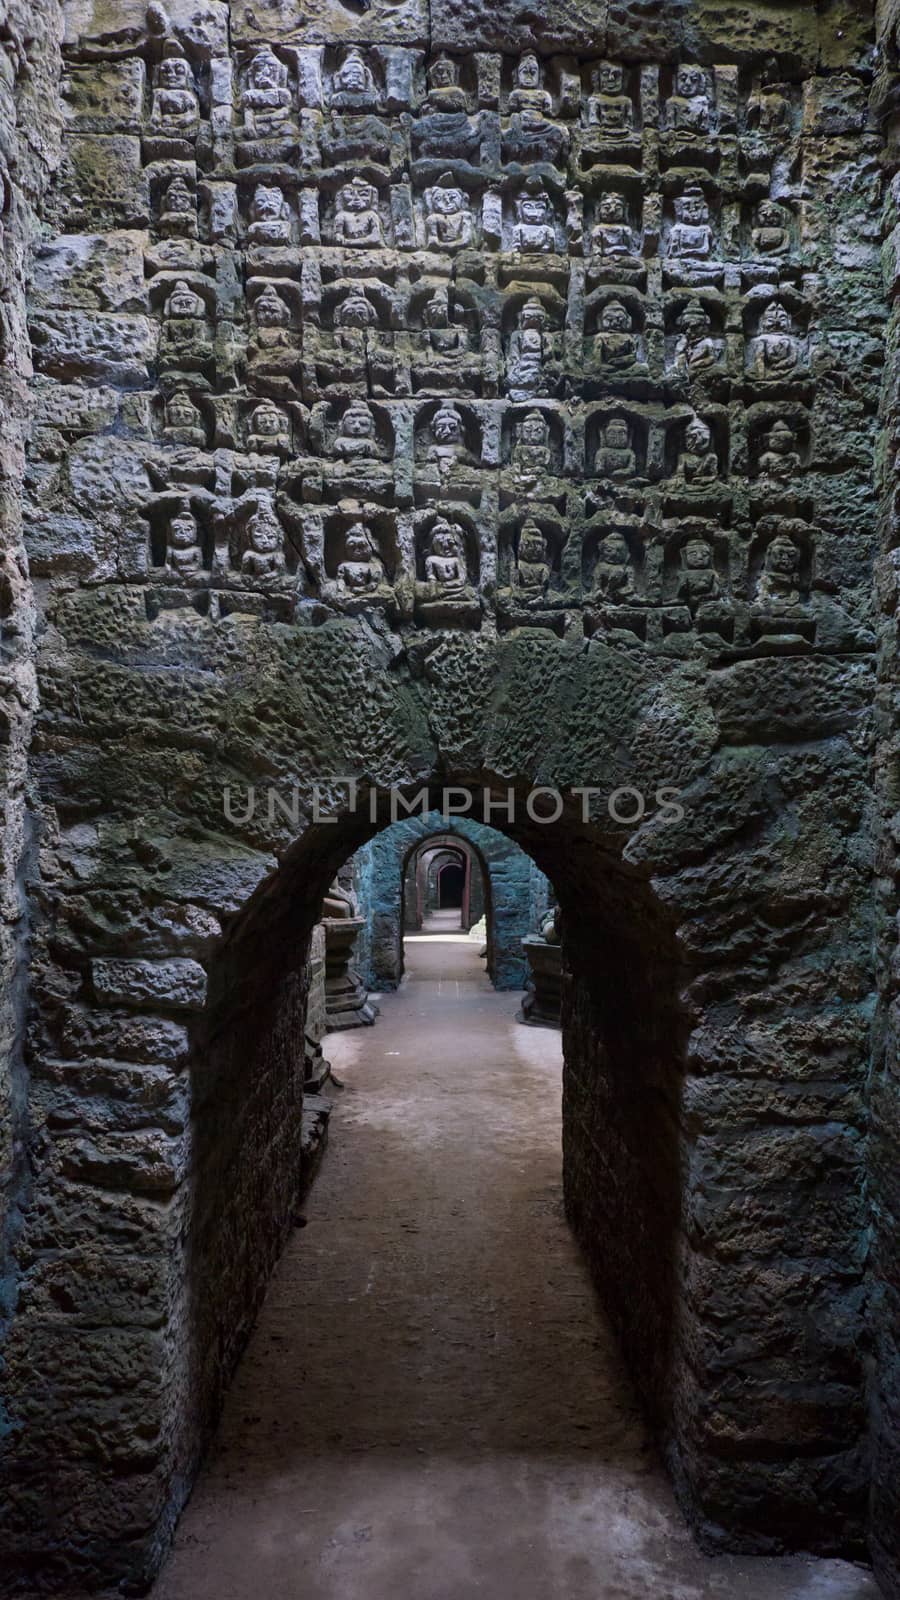 Interior of the Koe-thaung Temple, the temple of the 90,000 Buddhas, built by King Min Dikkha during the years 1554-1556 in Mrauk U, Rakhine State in Myanmar.